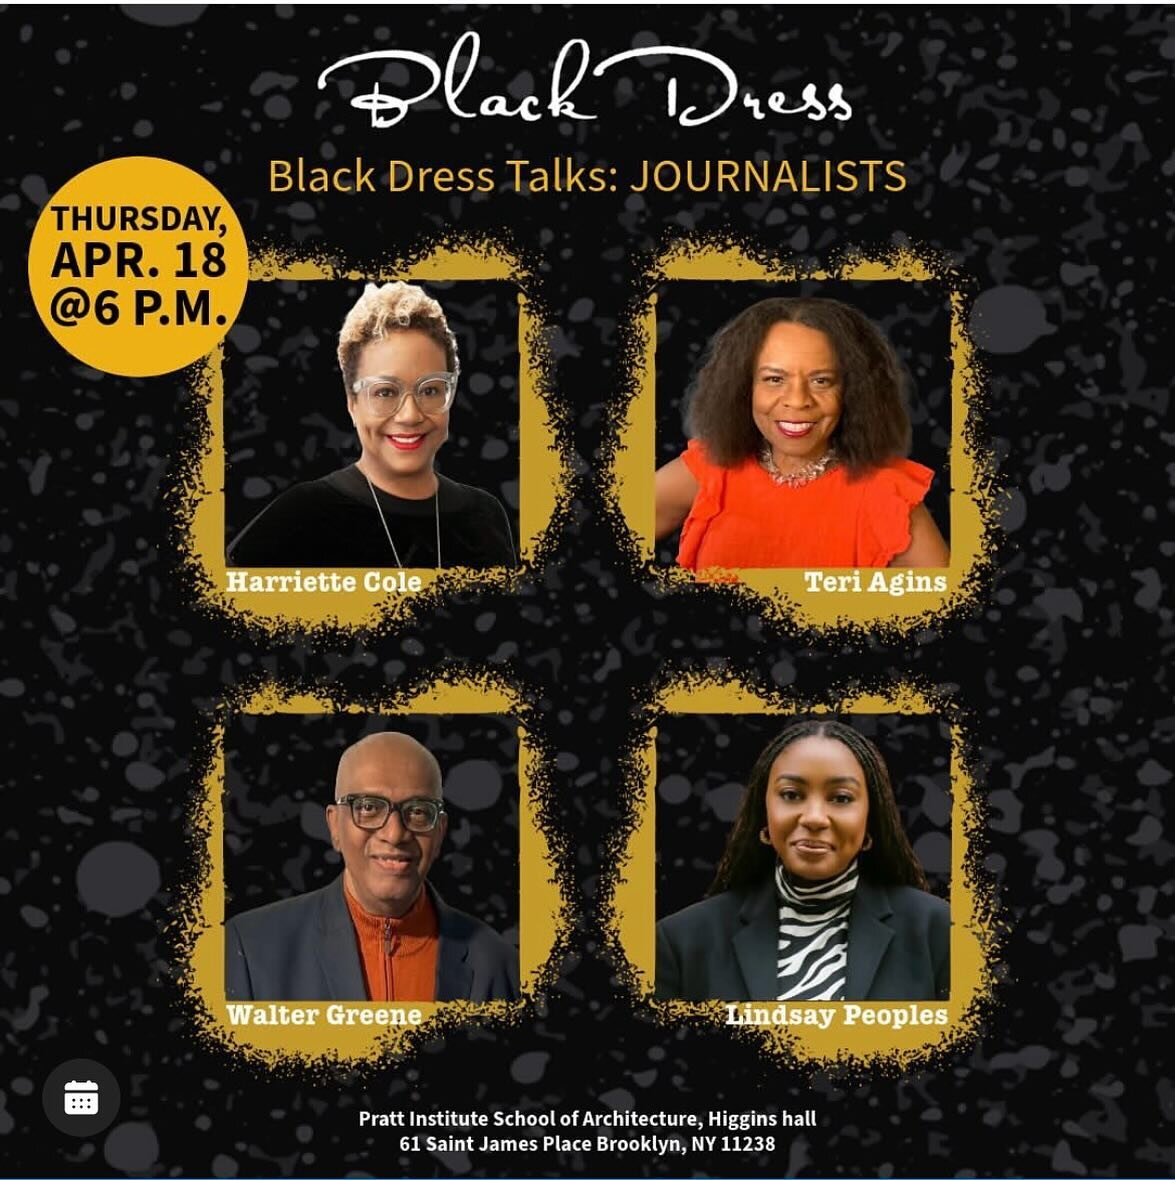 WRITERS &amp; FASHION LOVERS GET READY! Sign up for the Black Dress Project and Pratt Fashion&rsquo;s fourth event in an ongoing series entitled, &ldquo;Black Dress Talks.&rdquo; It&rsquo;s free!

This series highlights the contributions made by Blac